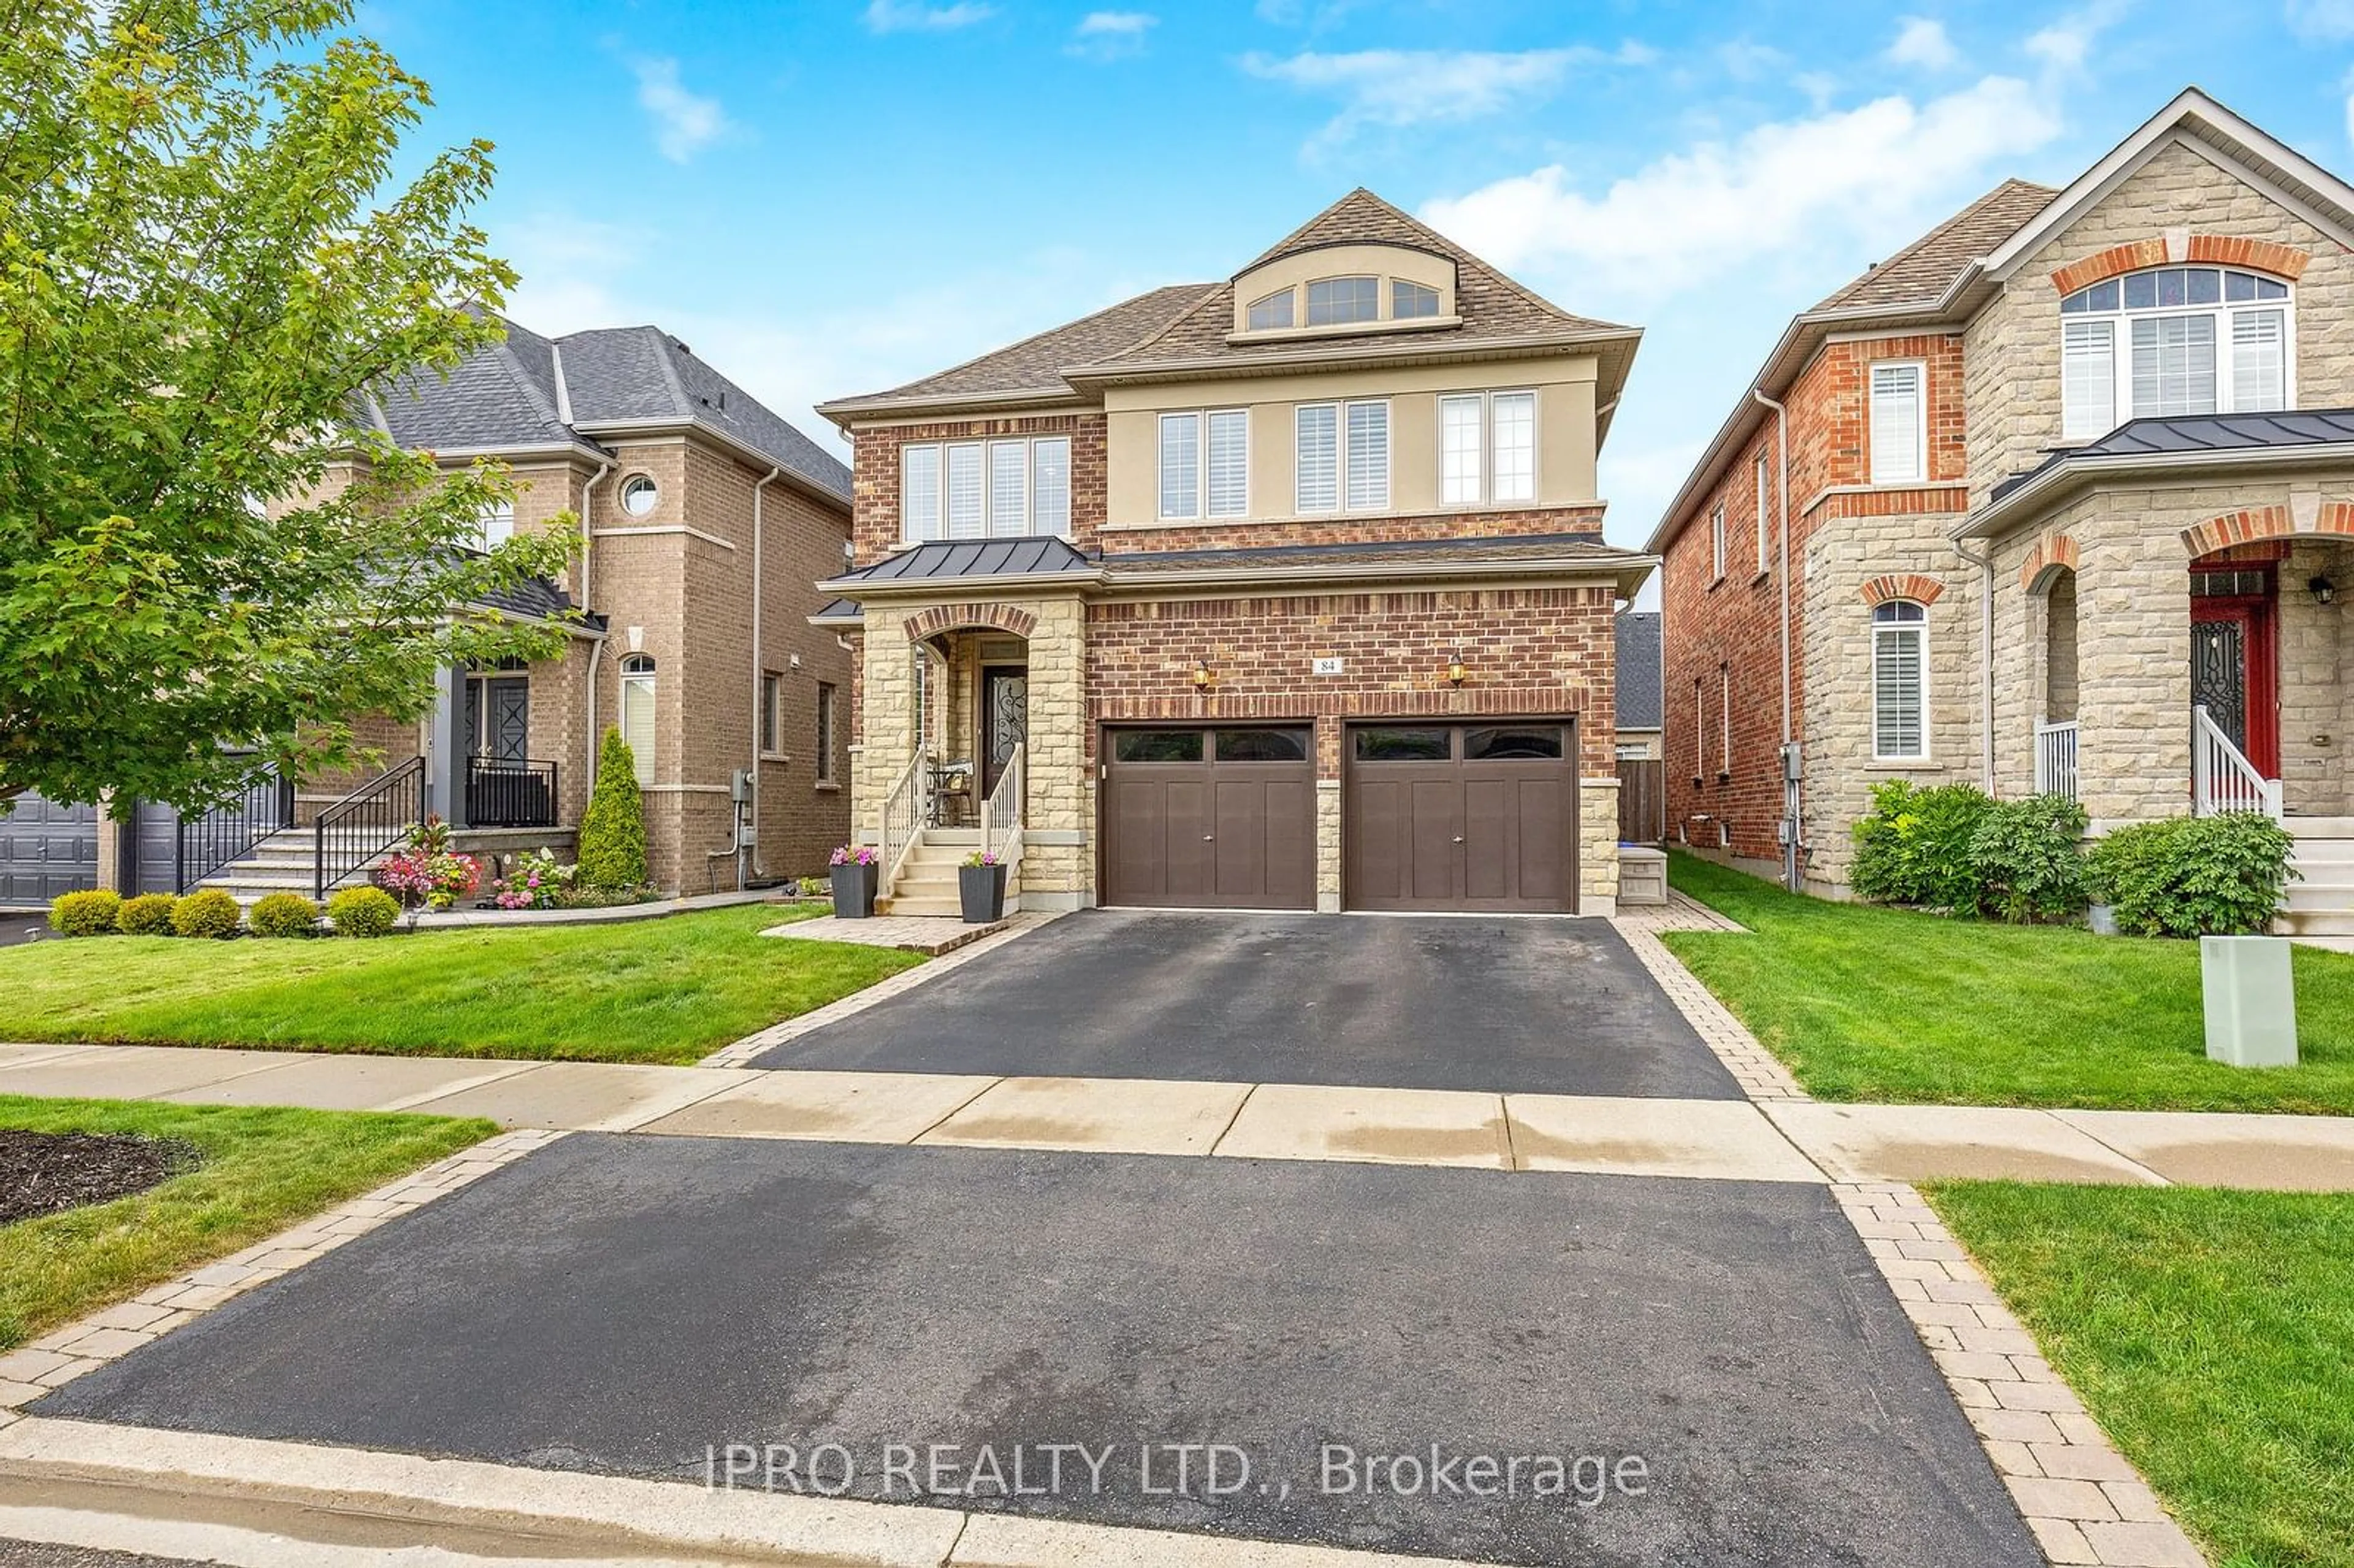 Home with brick exterior material for 84 Northwest Crt, Halton Hills Ontario L7G 0K7